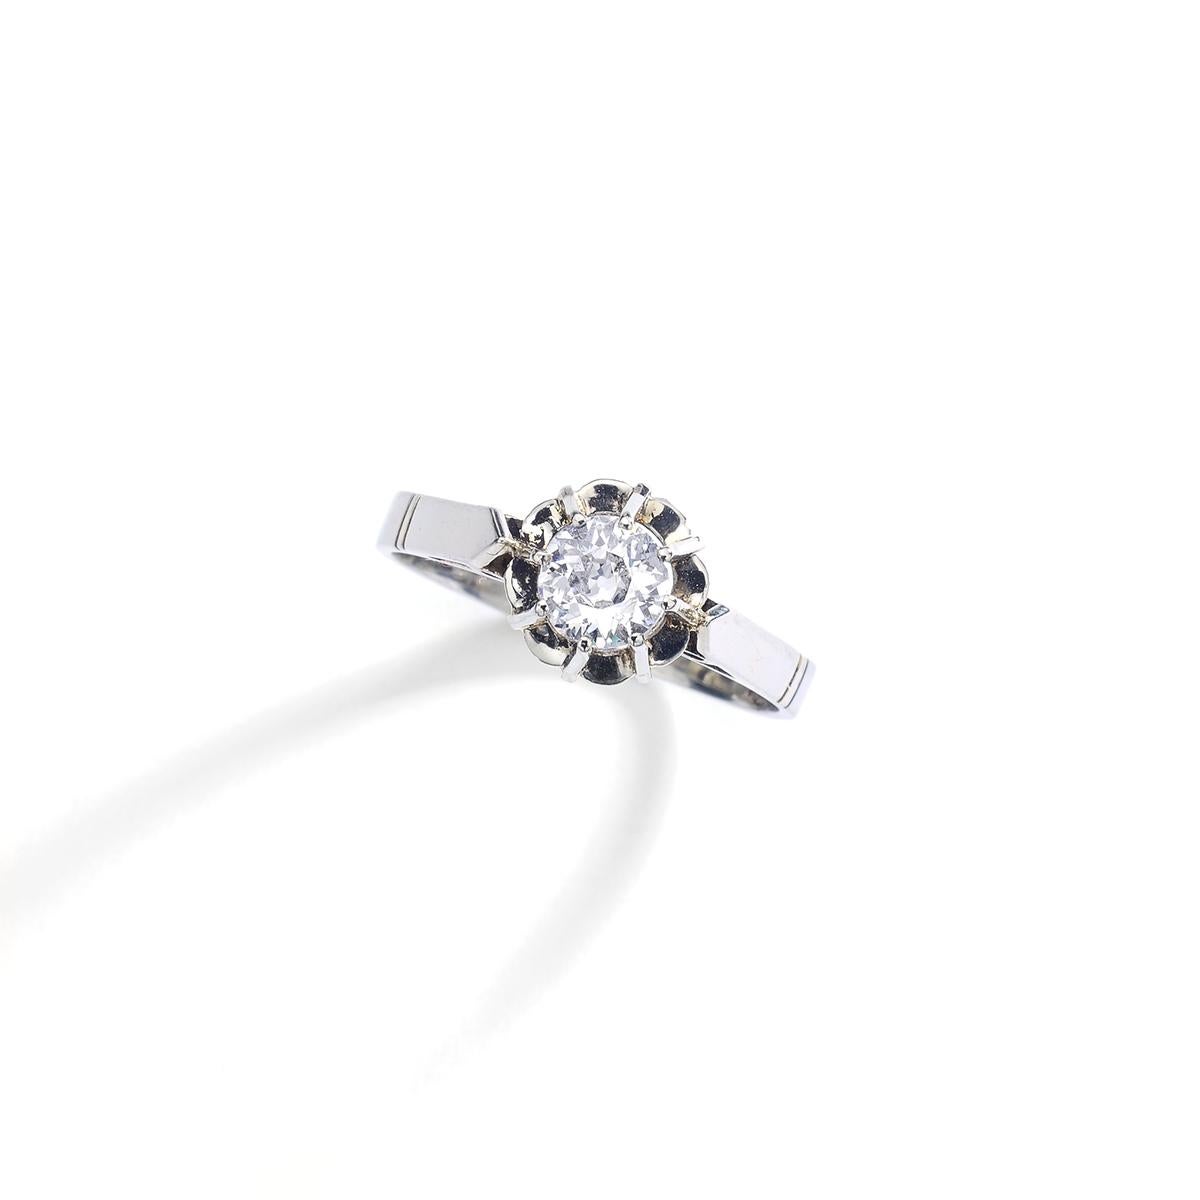 Antique white gold Solitaire centered by an Old mine cut Diamond 0.45 carat.
French assay marks.
Circa 1900.
Ring size: 6 1/2 US.